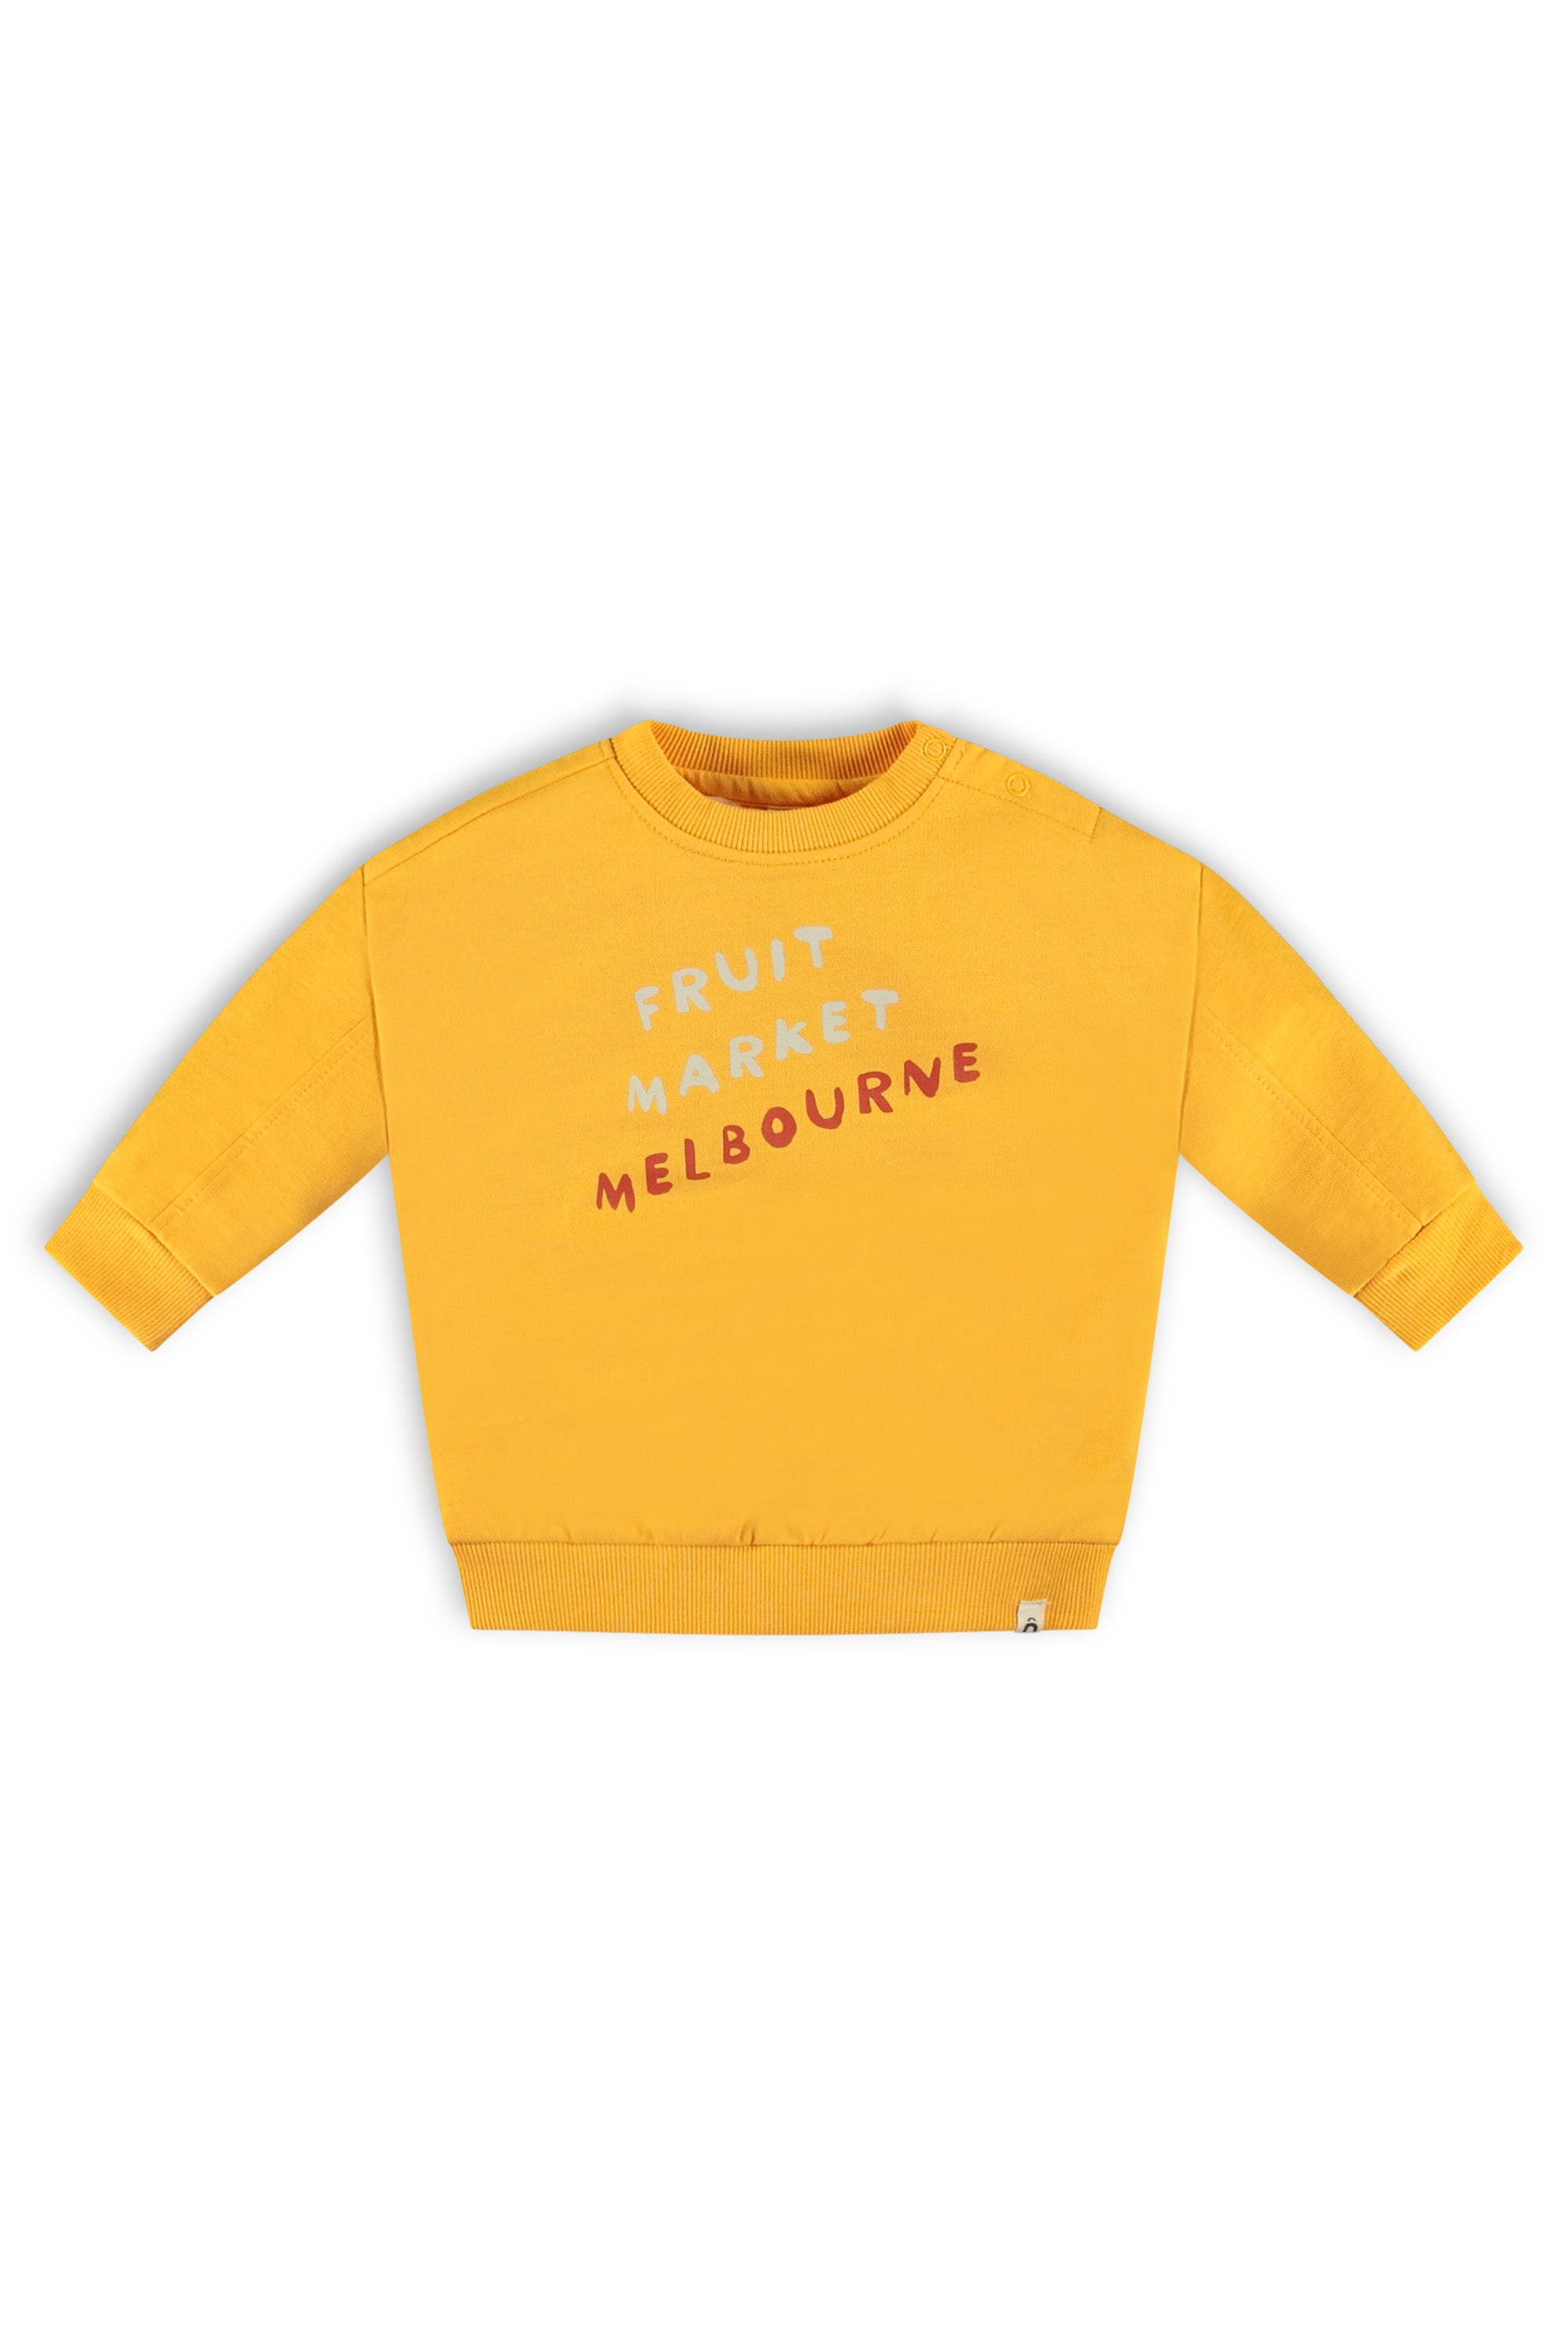 The New Chapter Sweater with fruit market Melbourne print